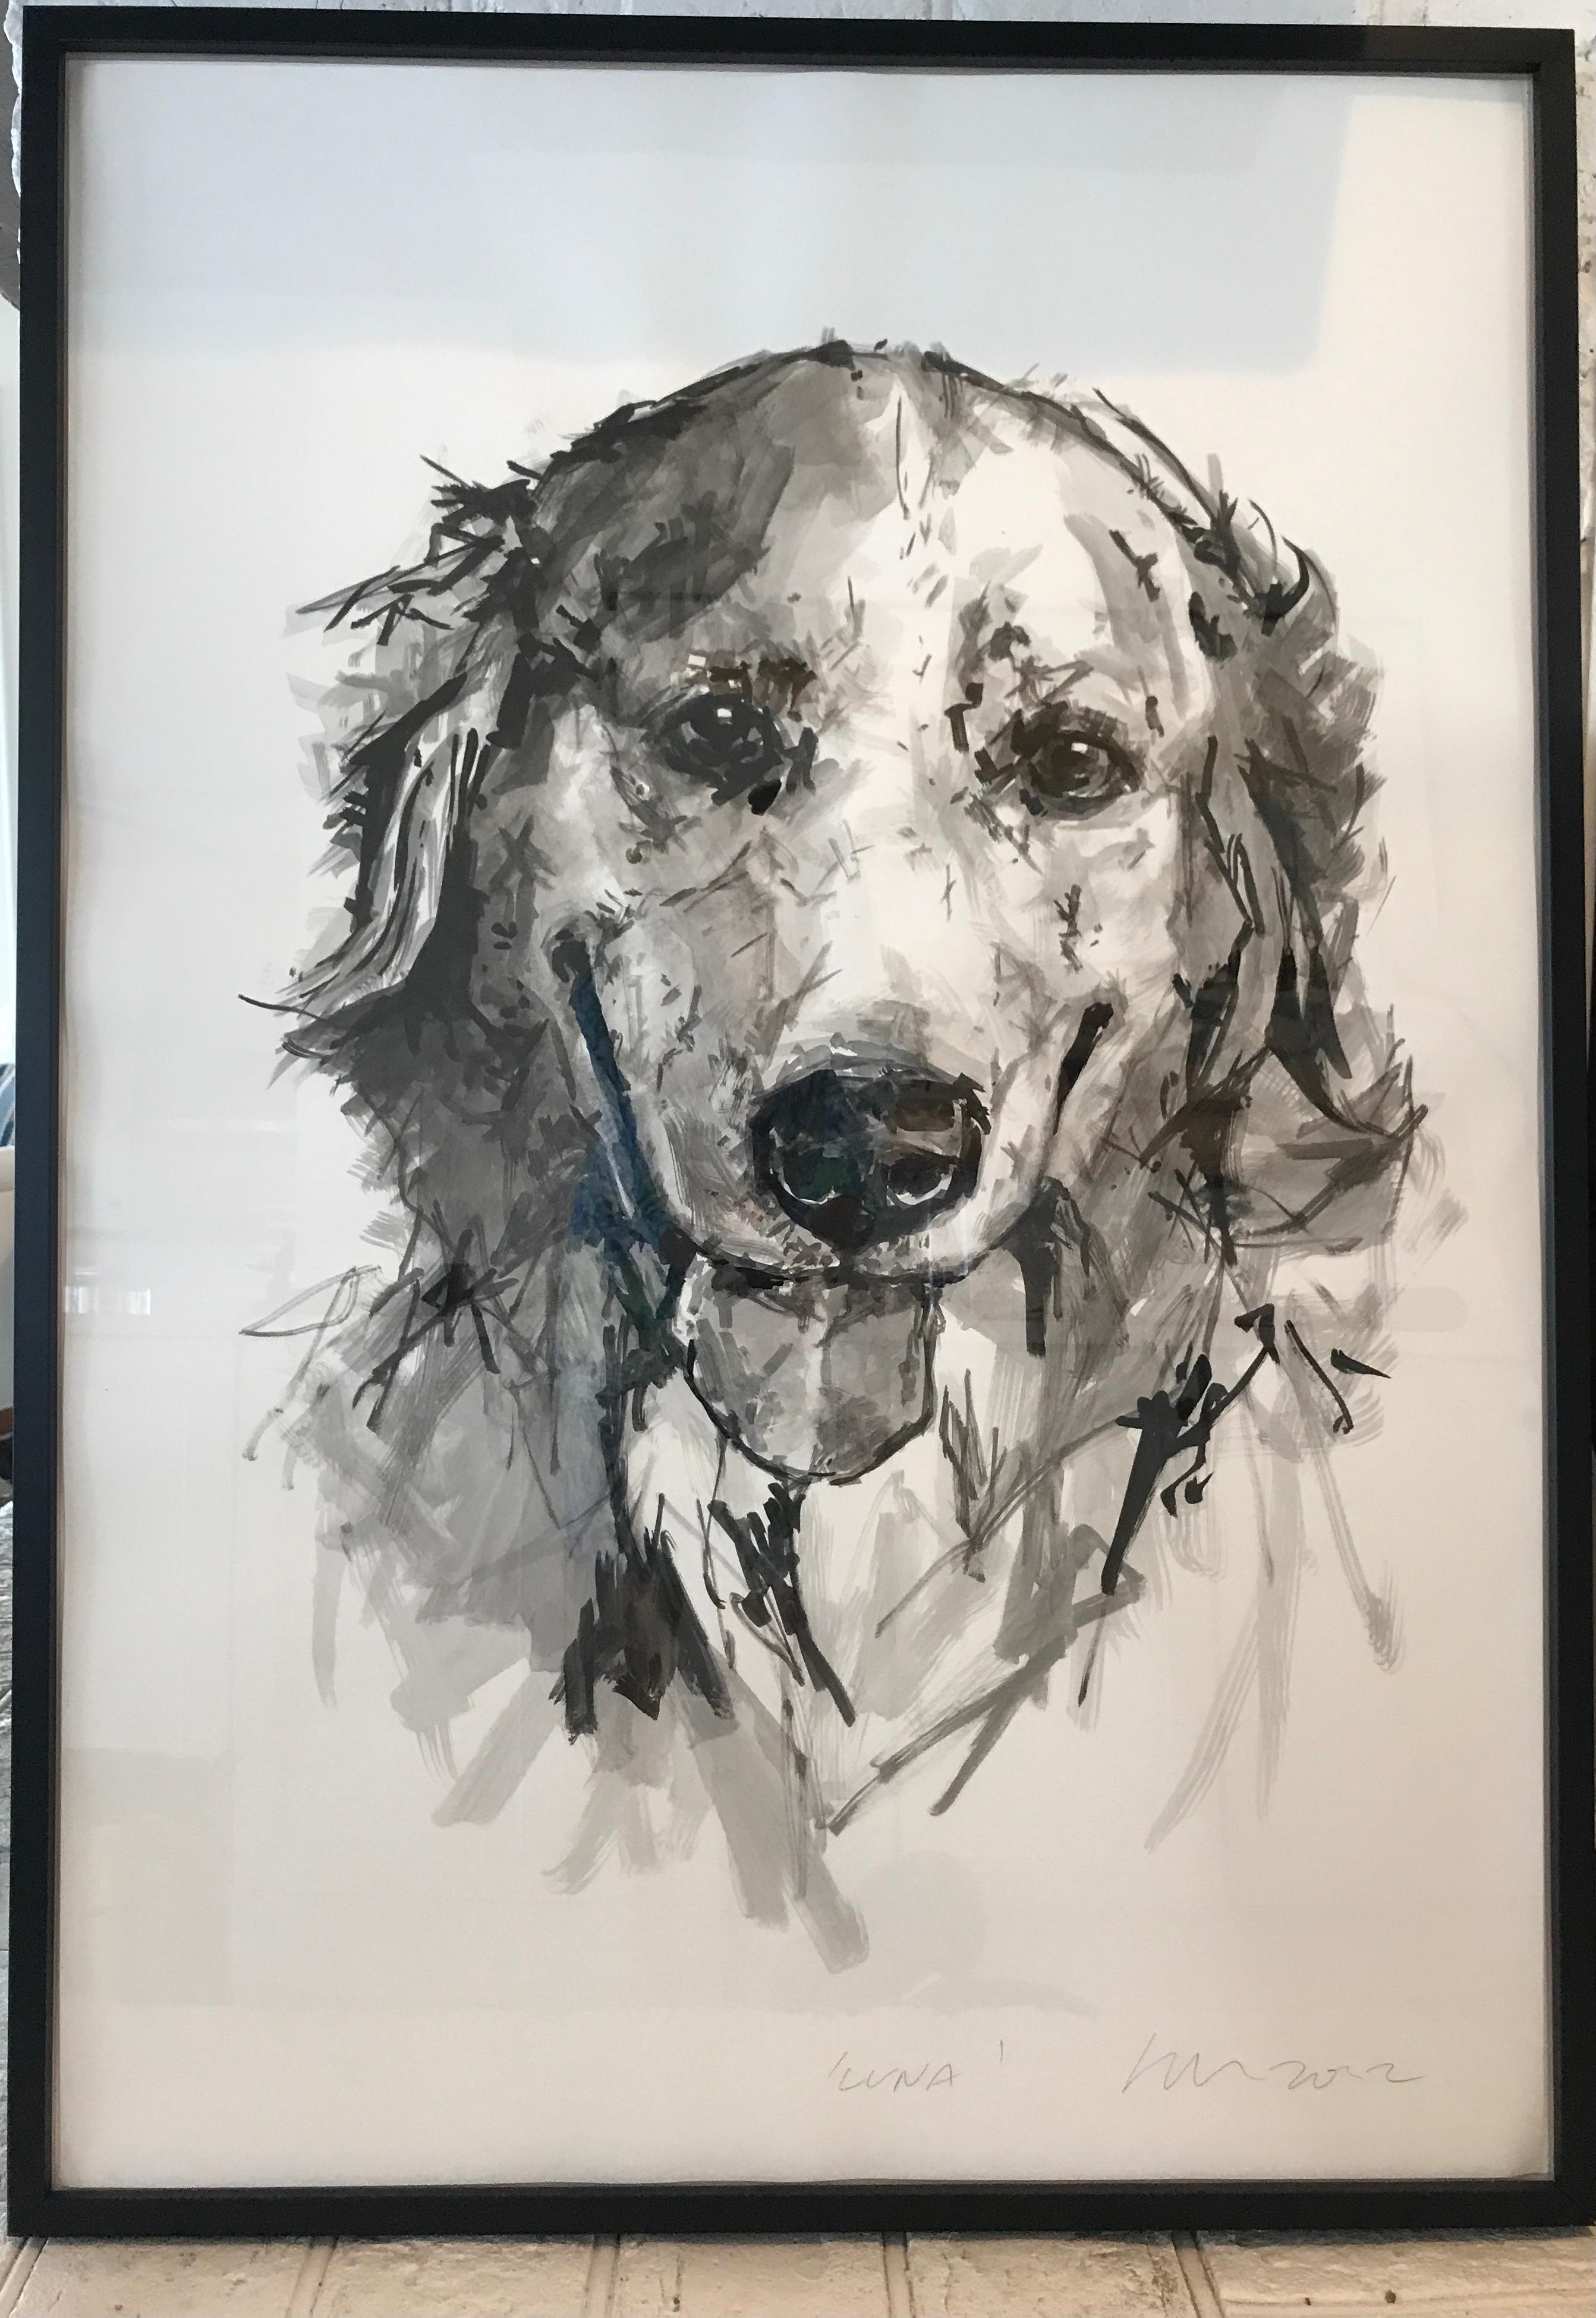 Golden Retriever 1, large contemporary minimal portrait in black ink on paper 2